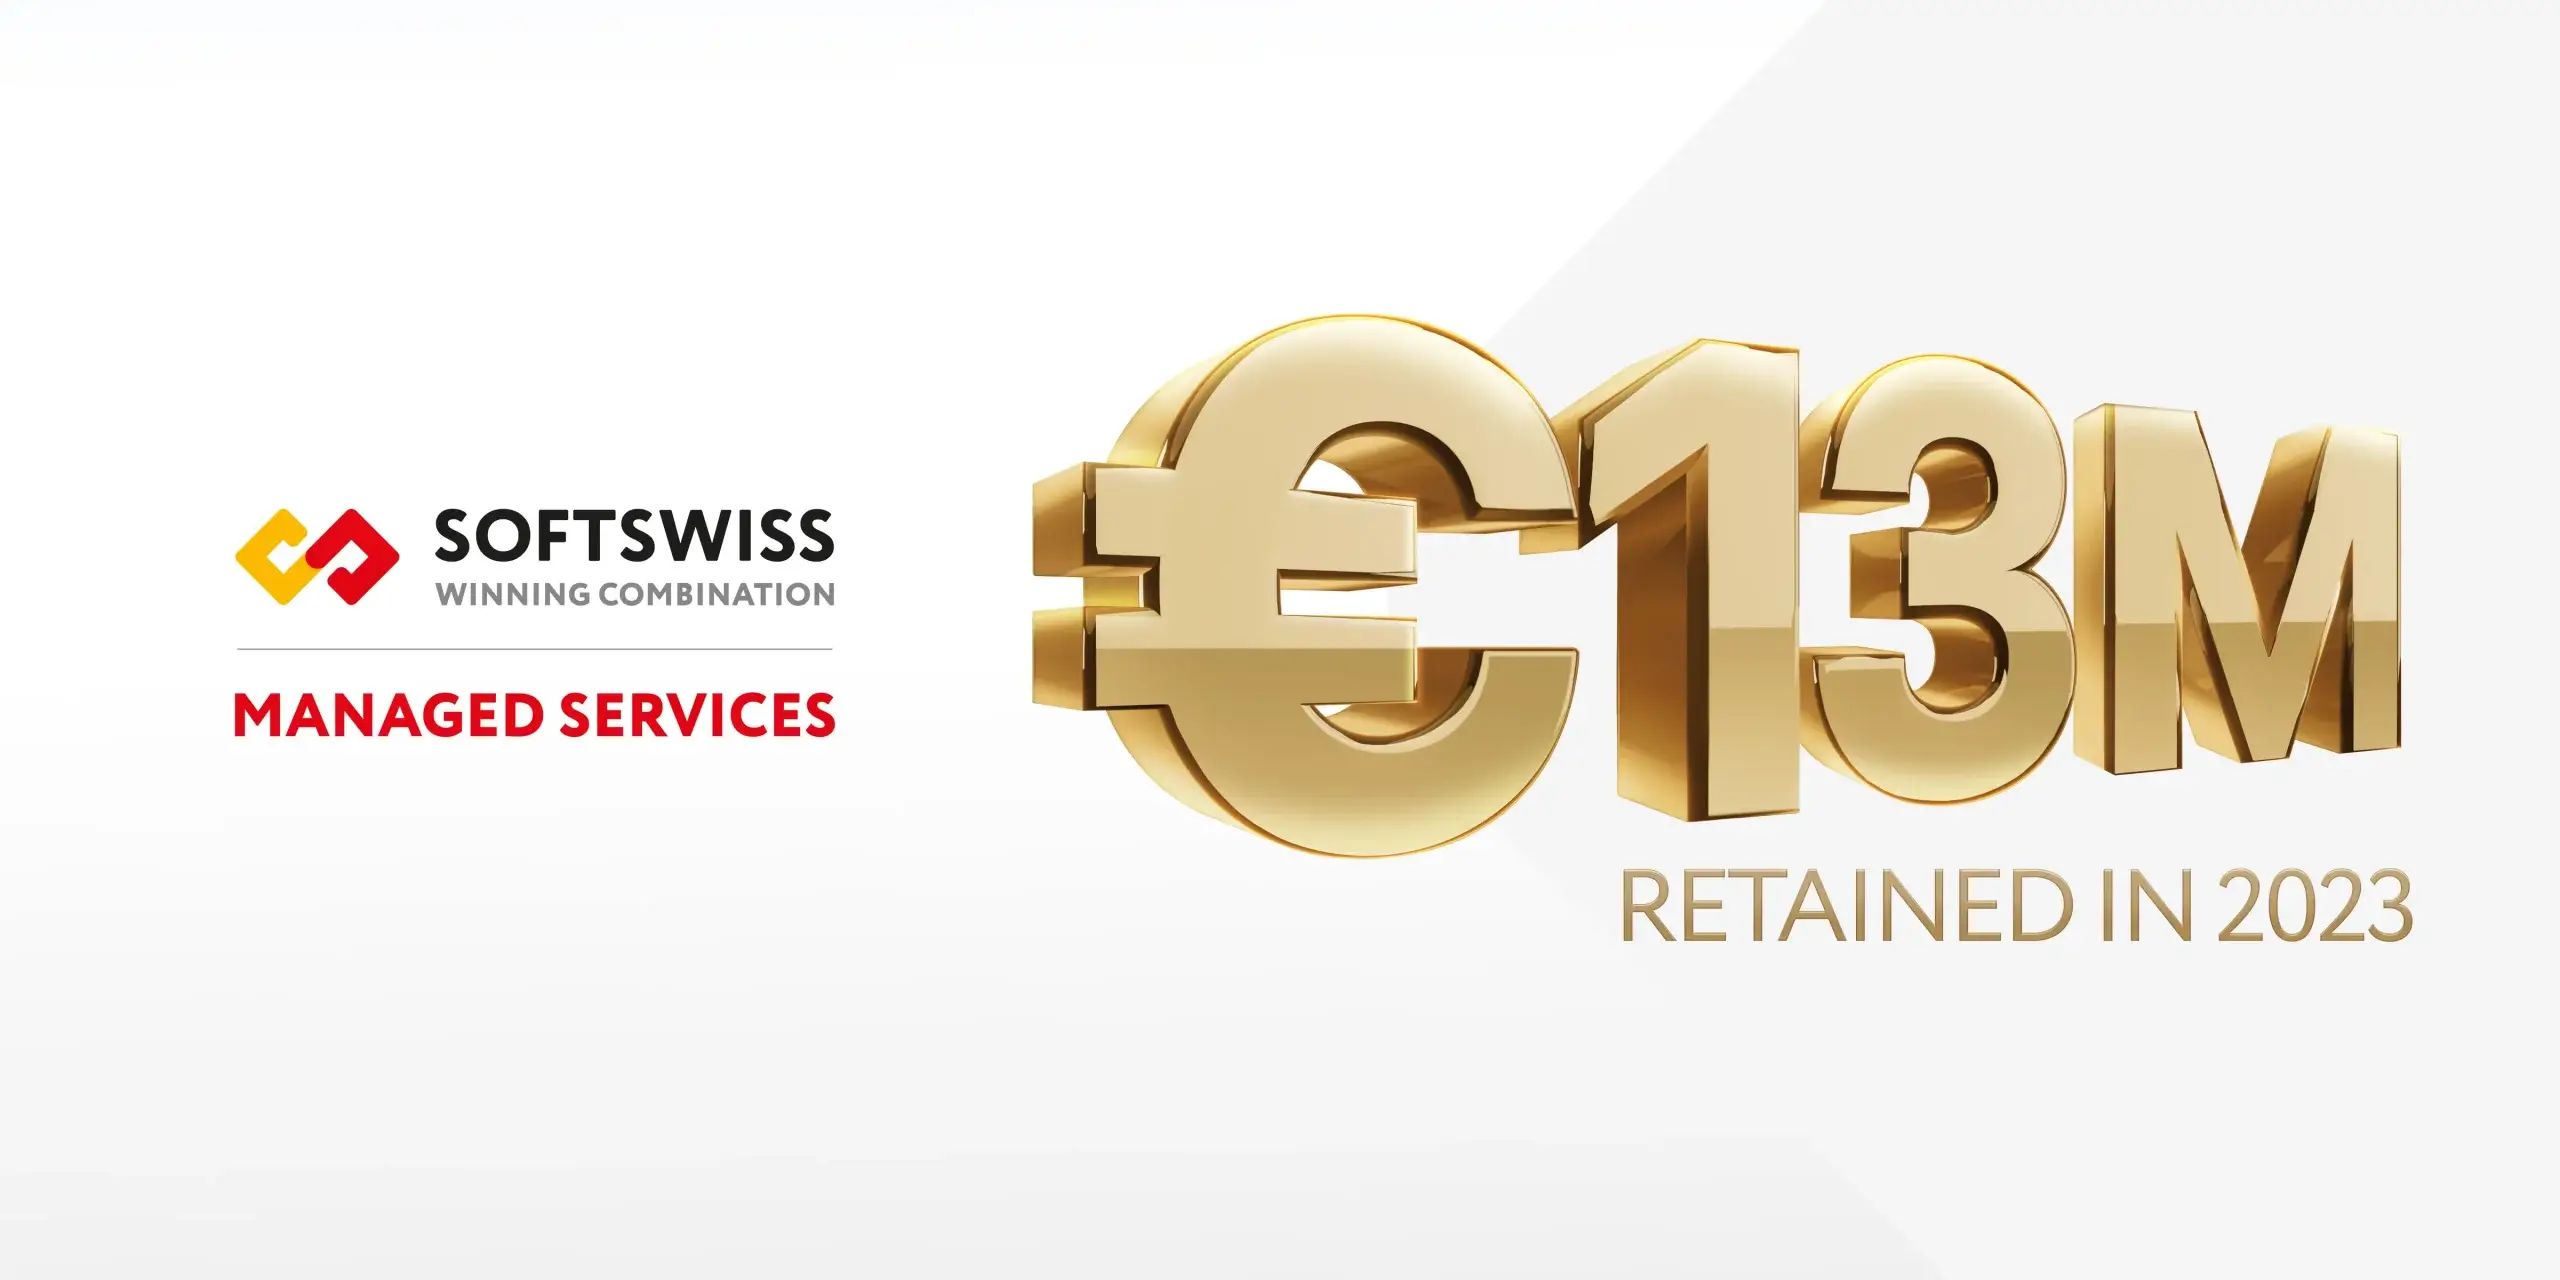 SOFTSWISS Helps Operators Safeguard EUR 13m+ in 2023